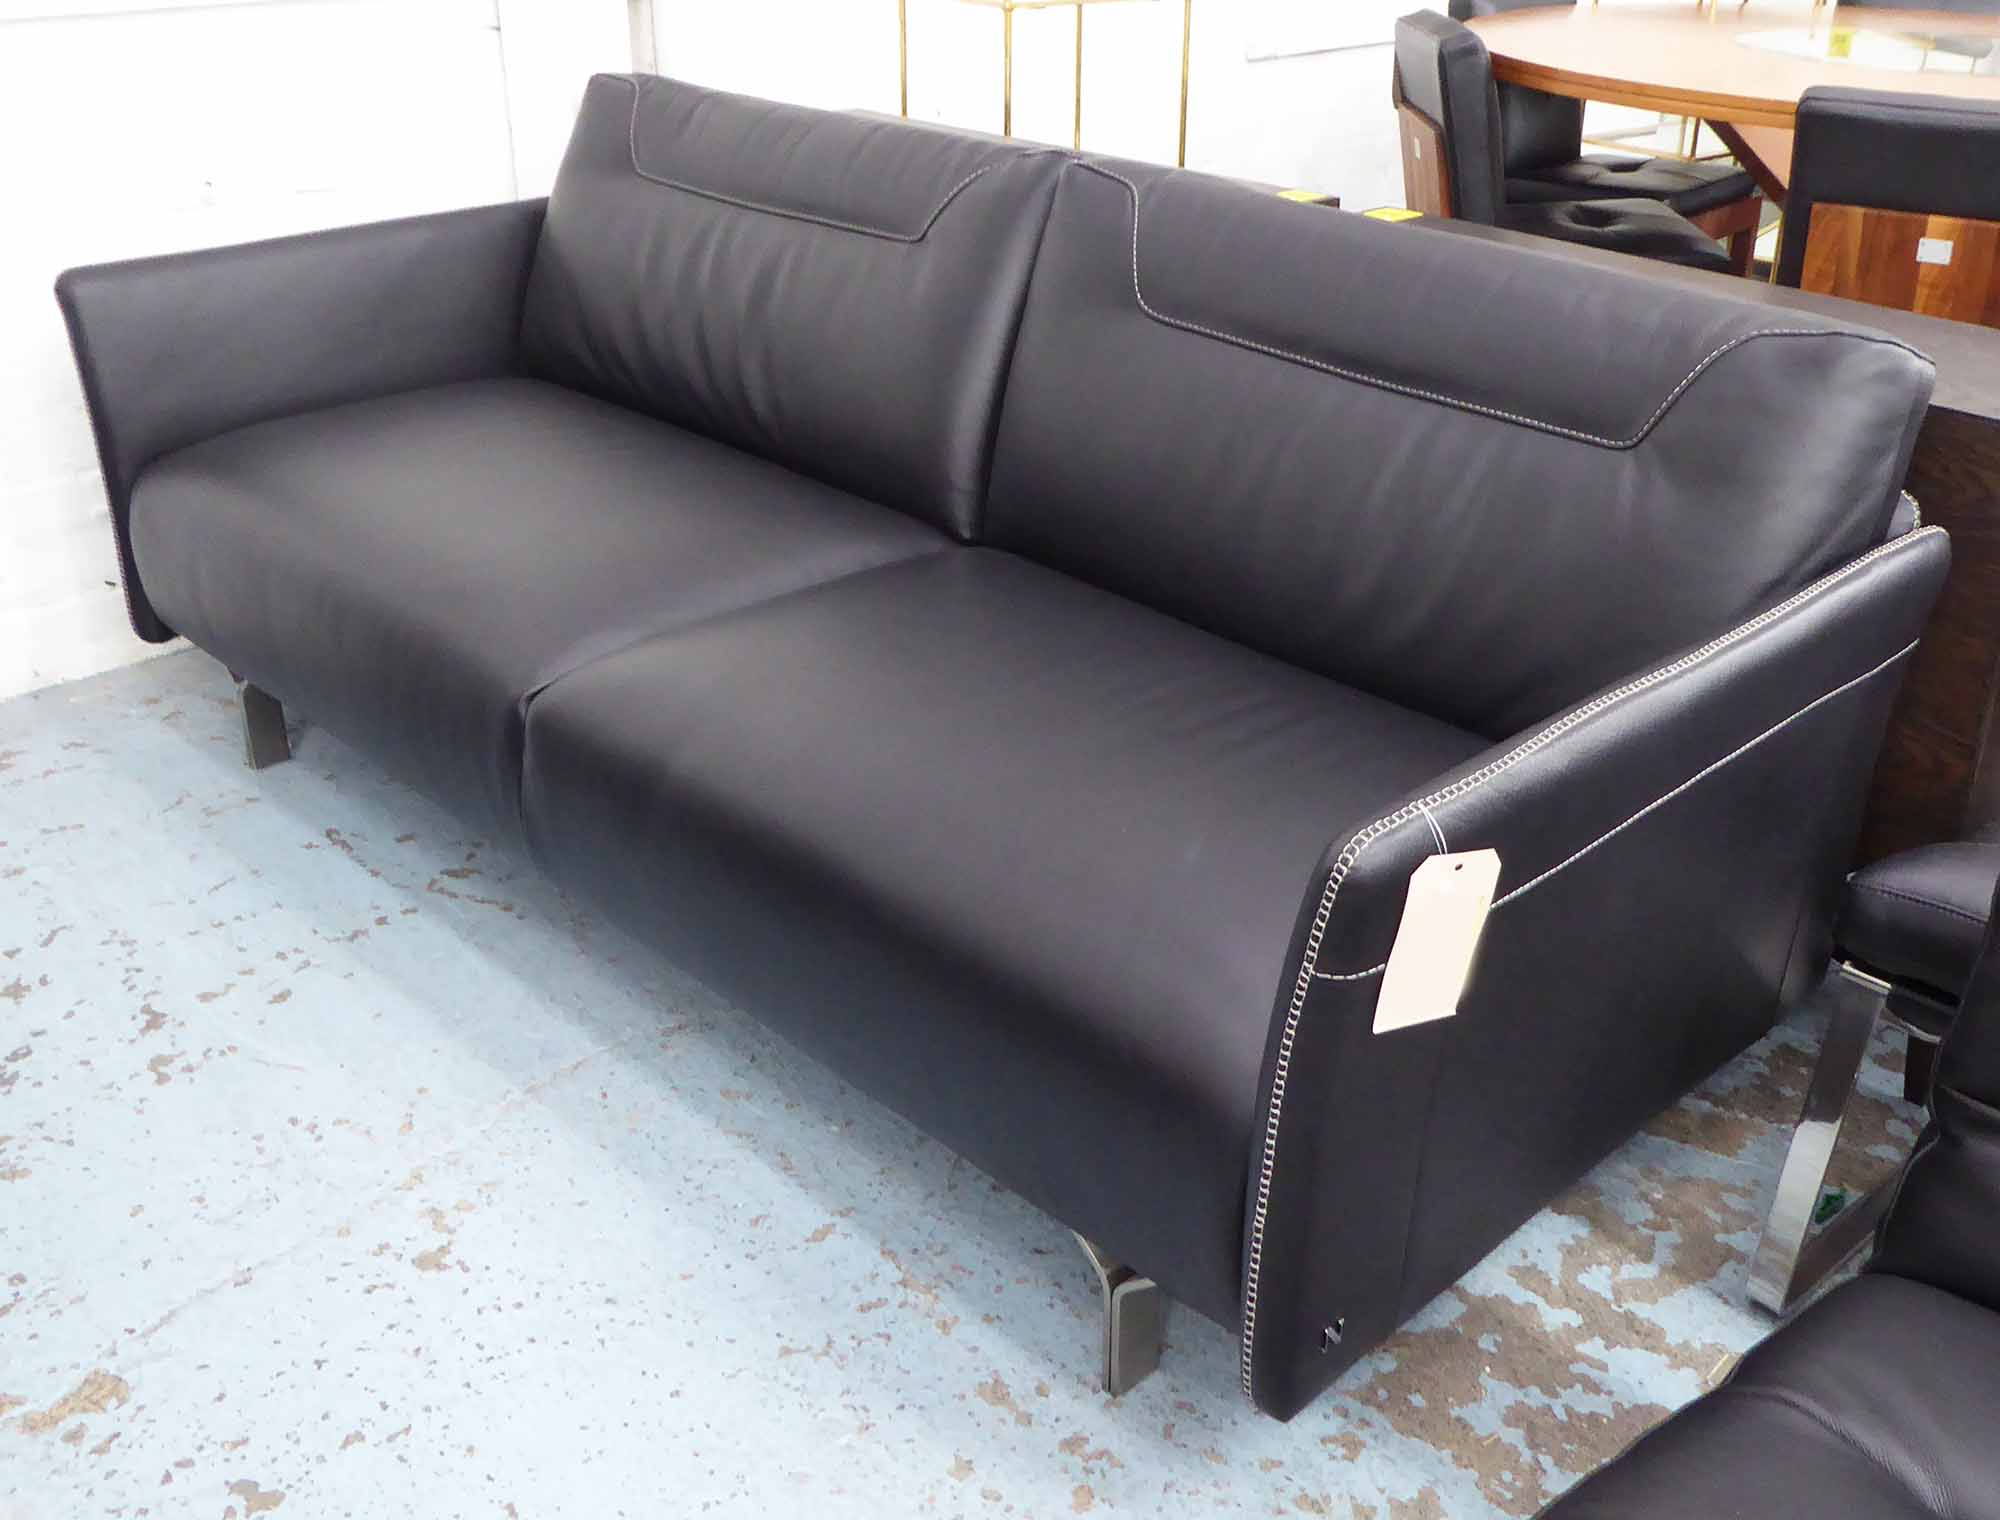 NATUZZI SOFA, two seater, in black stitched leather on